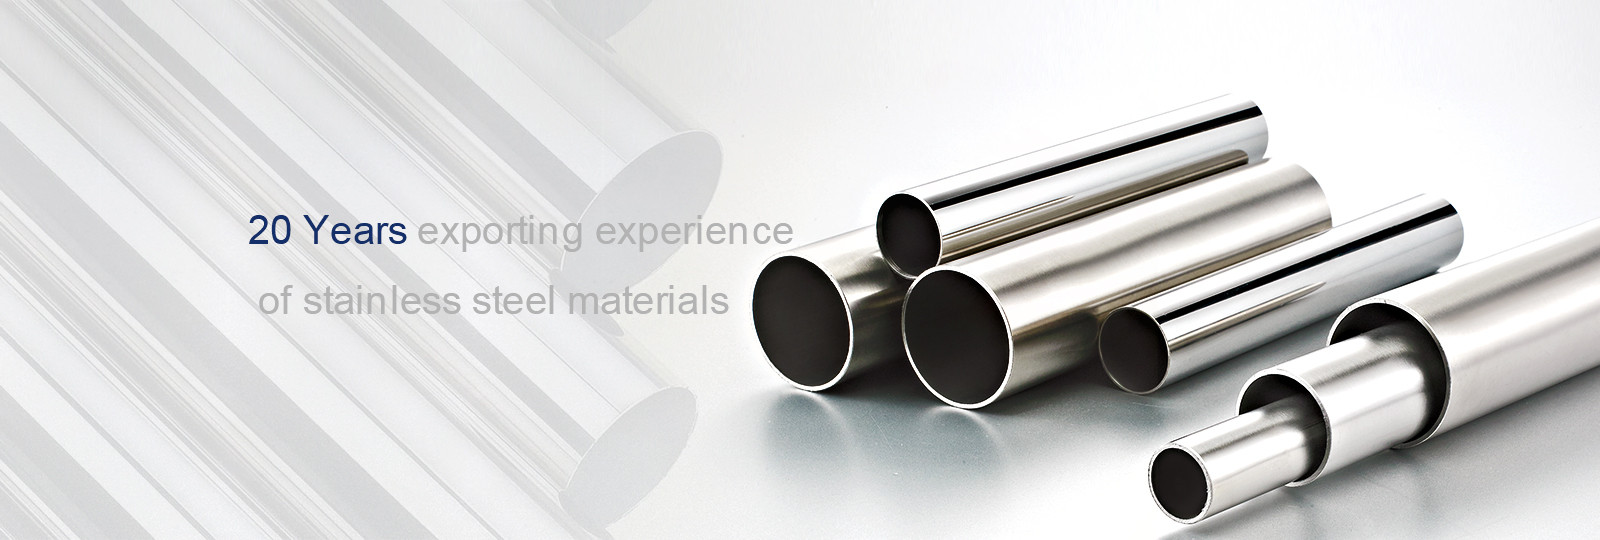 LK Stainless Steel famous manufacturer and exporter